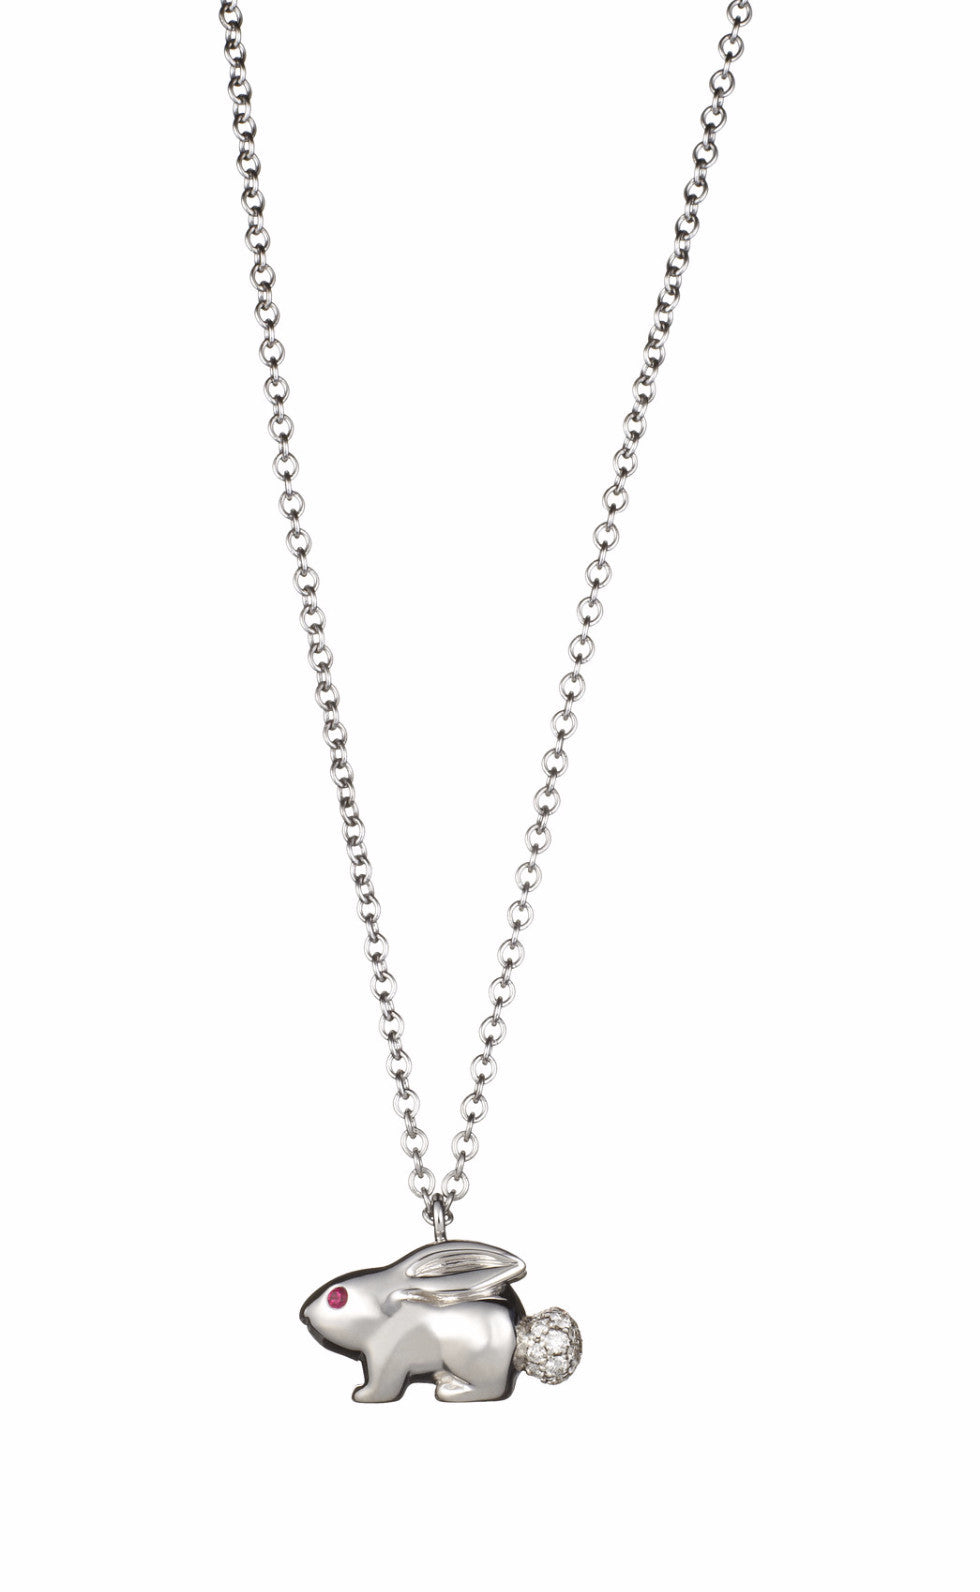 SOLID WHITE GOLD BUNNY NECKLACE